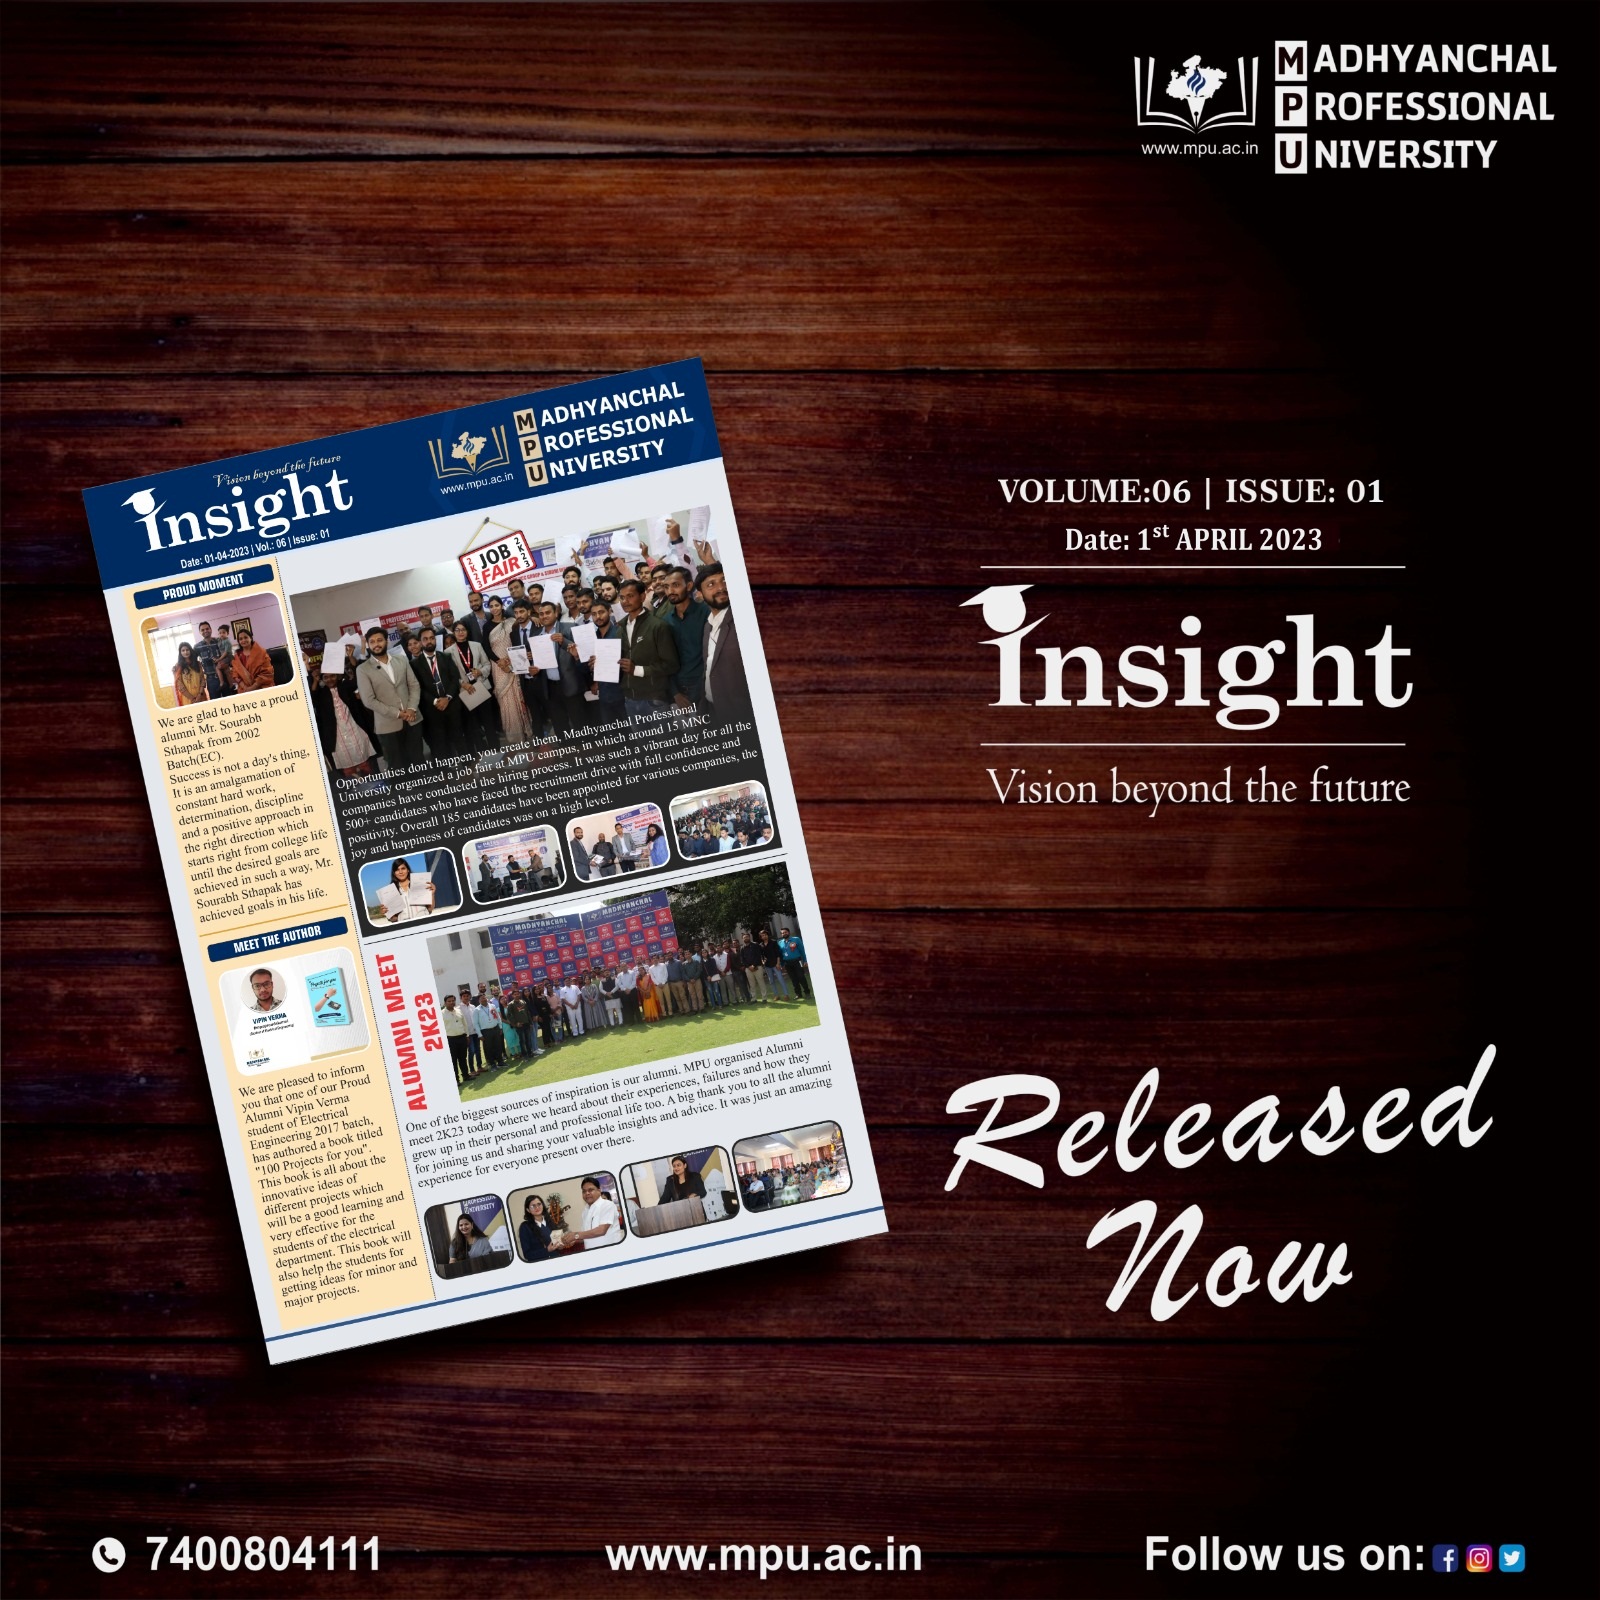 MPU News Letter Volume: 06, Issue: 01 Released Now!!